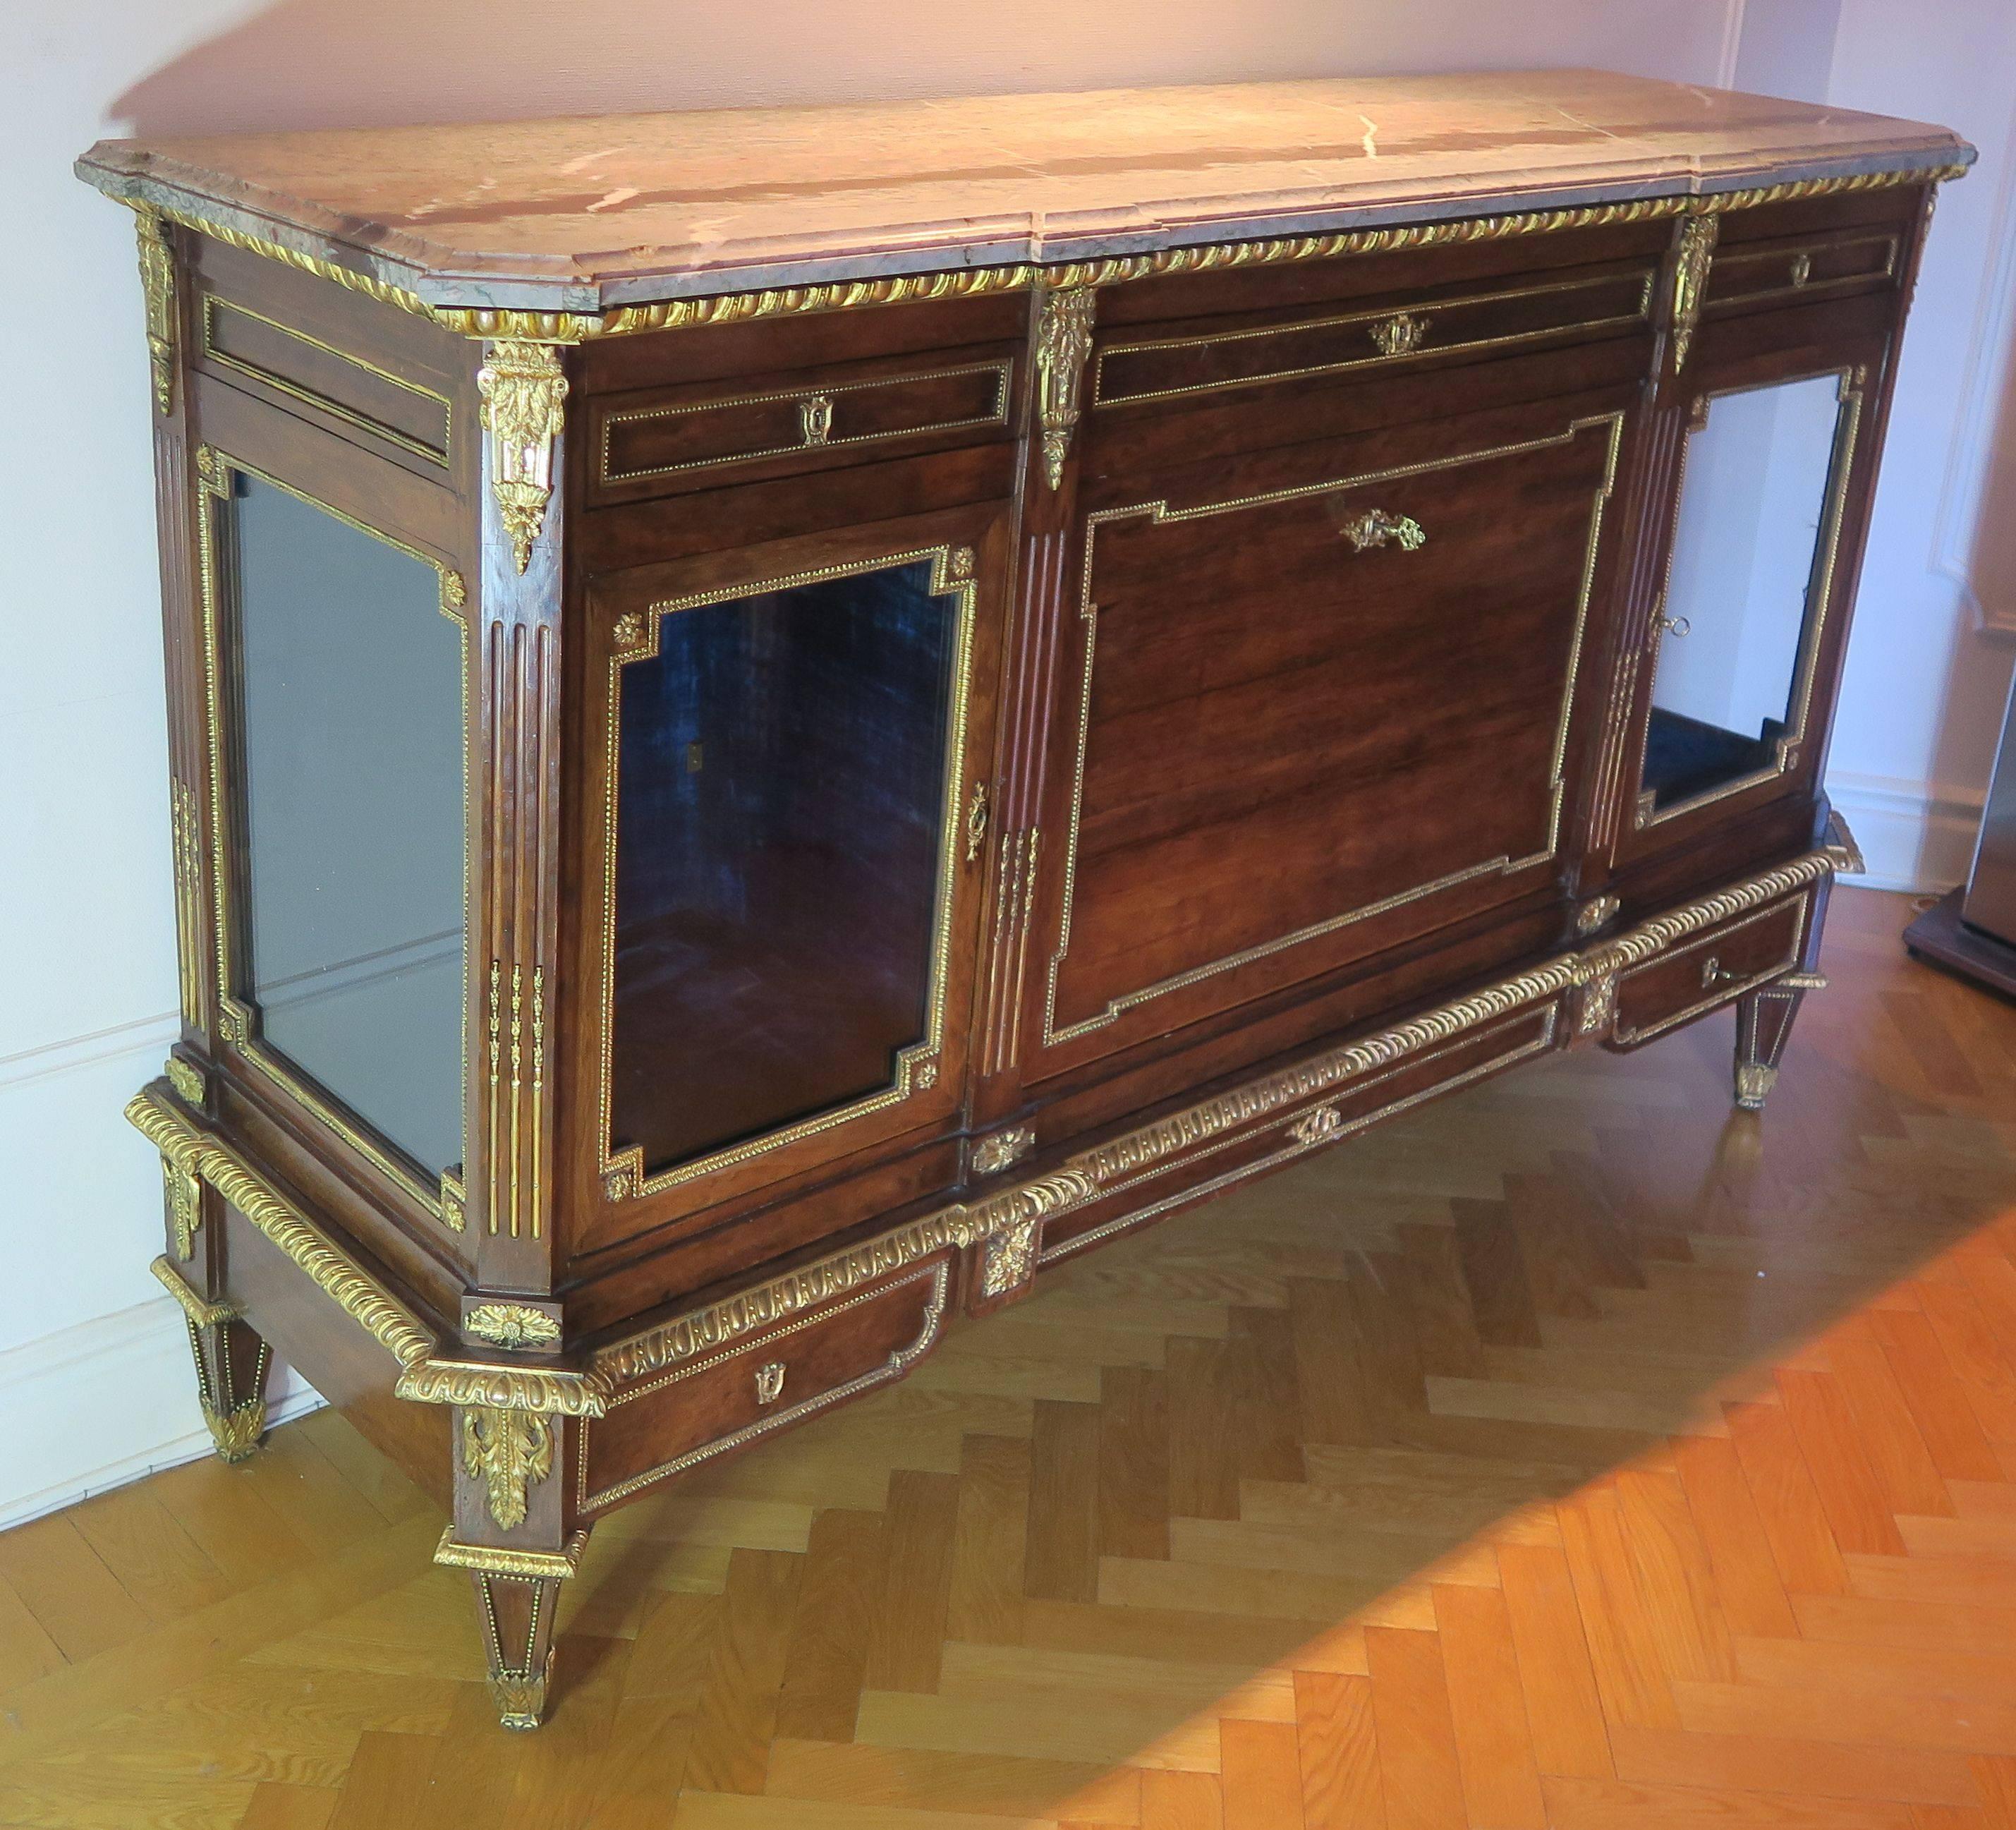 A solid mahogany commode, with gilt bronze mounts and original marble top, attributed Jean-Henri Riesener.